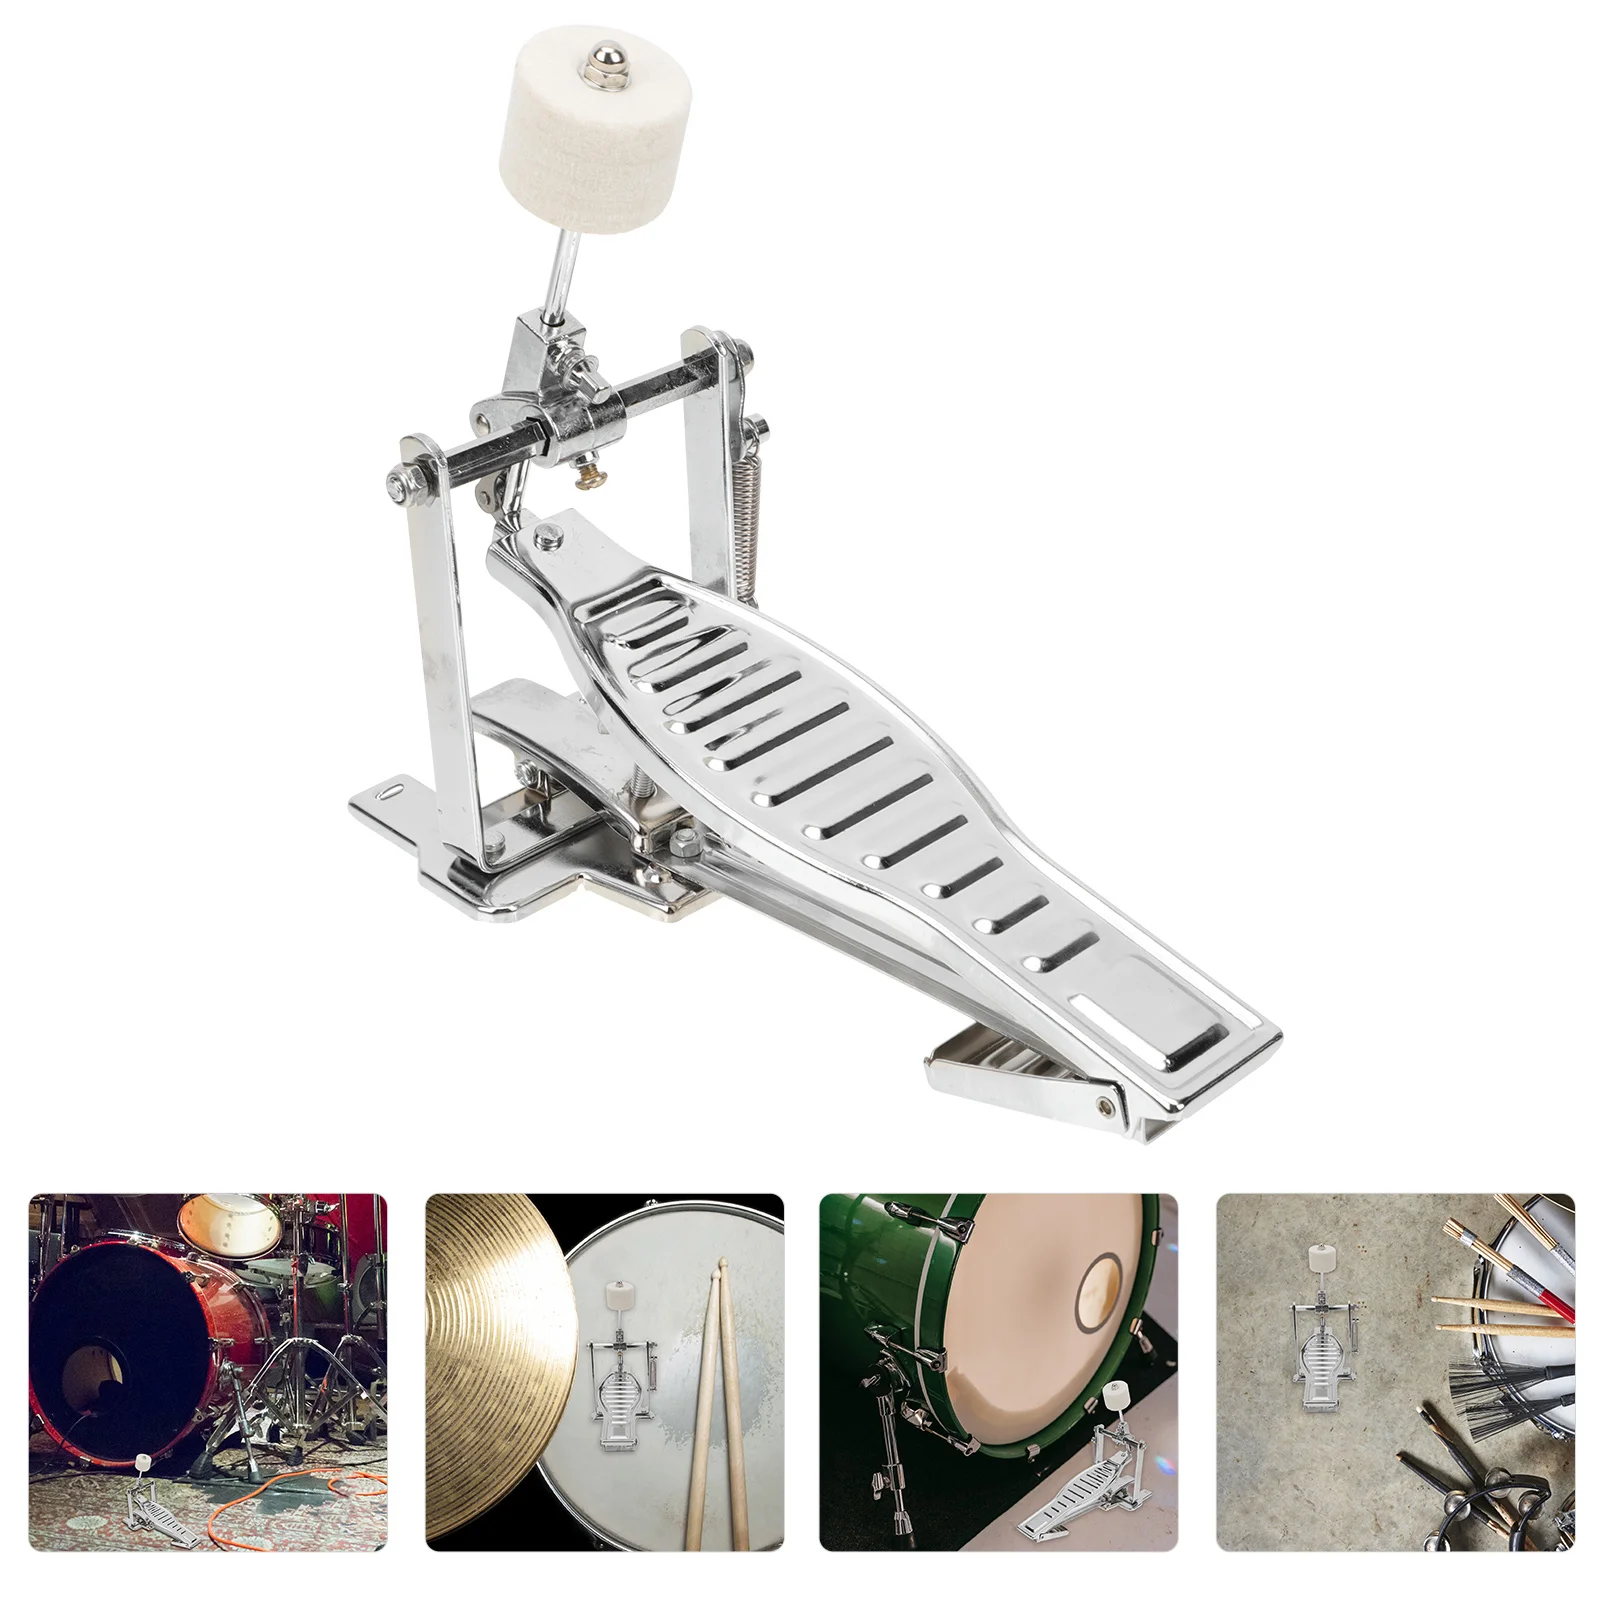 

Drum Pedal Single Kit Accessory Instrument Chain Double Hammer Jazz Bass Professional Percussion Musical Accessories Kick Step